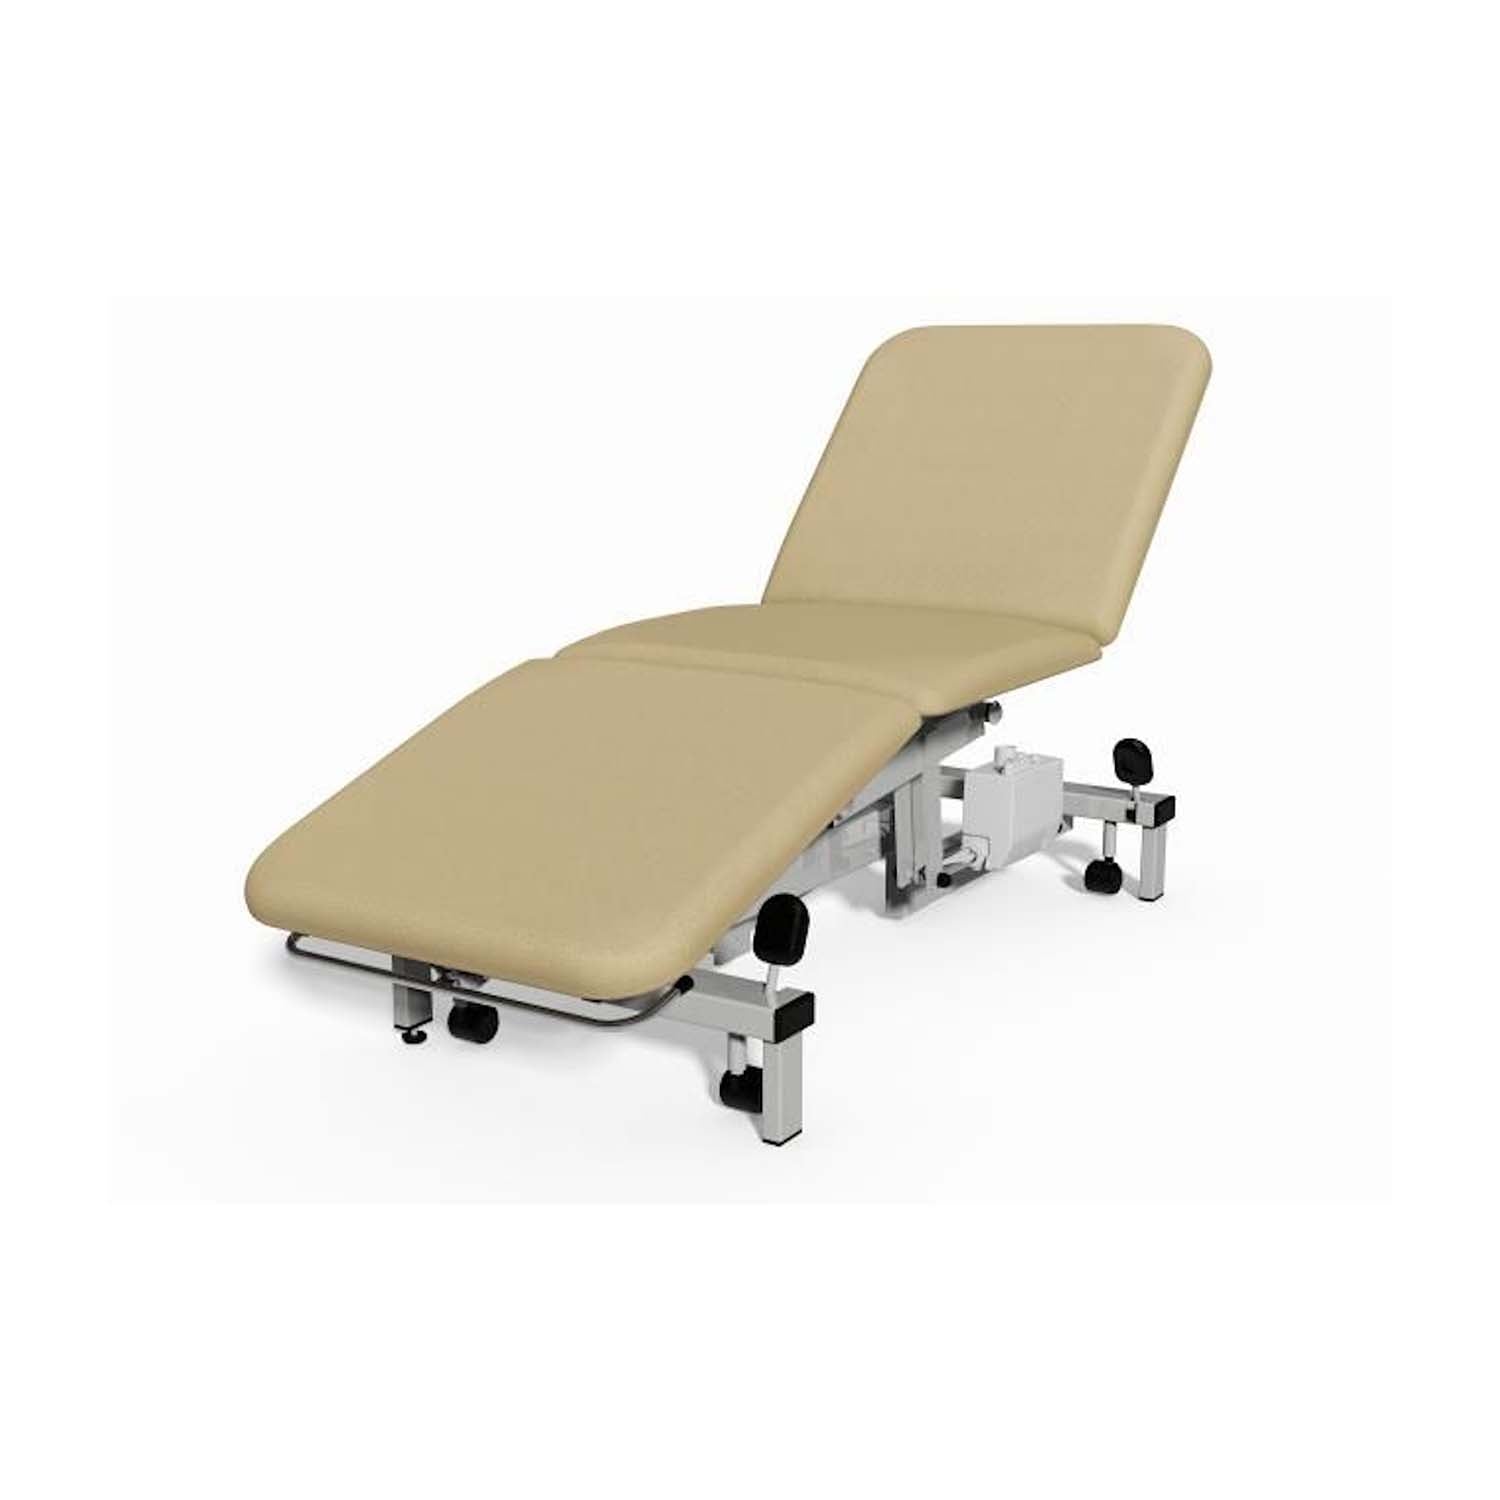 Plinth 2000 Model 503 3 Section Examination Couch | Hydraulic | Almond